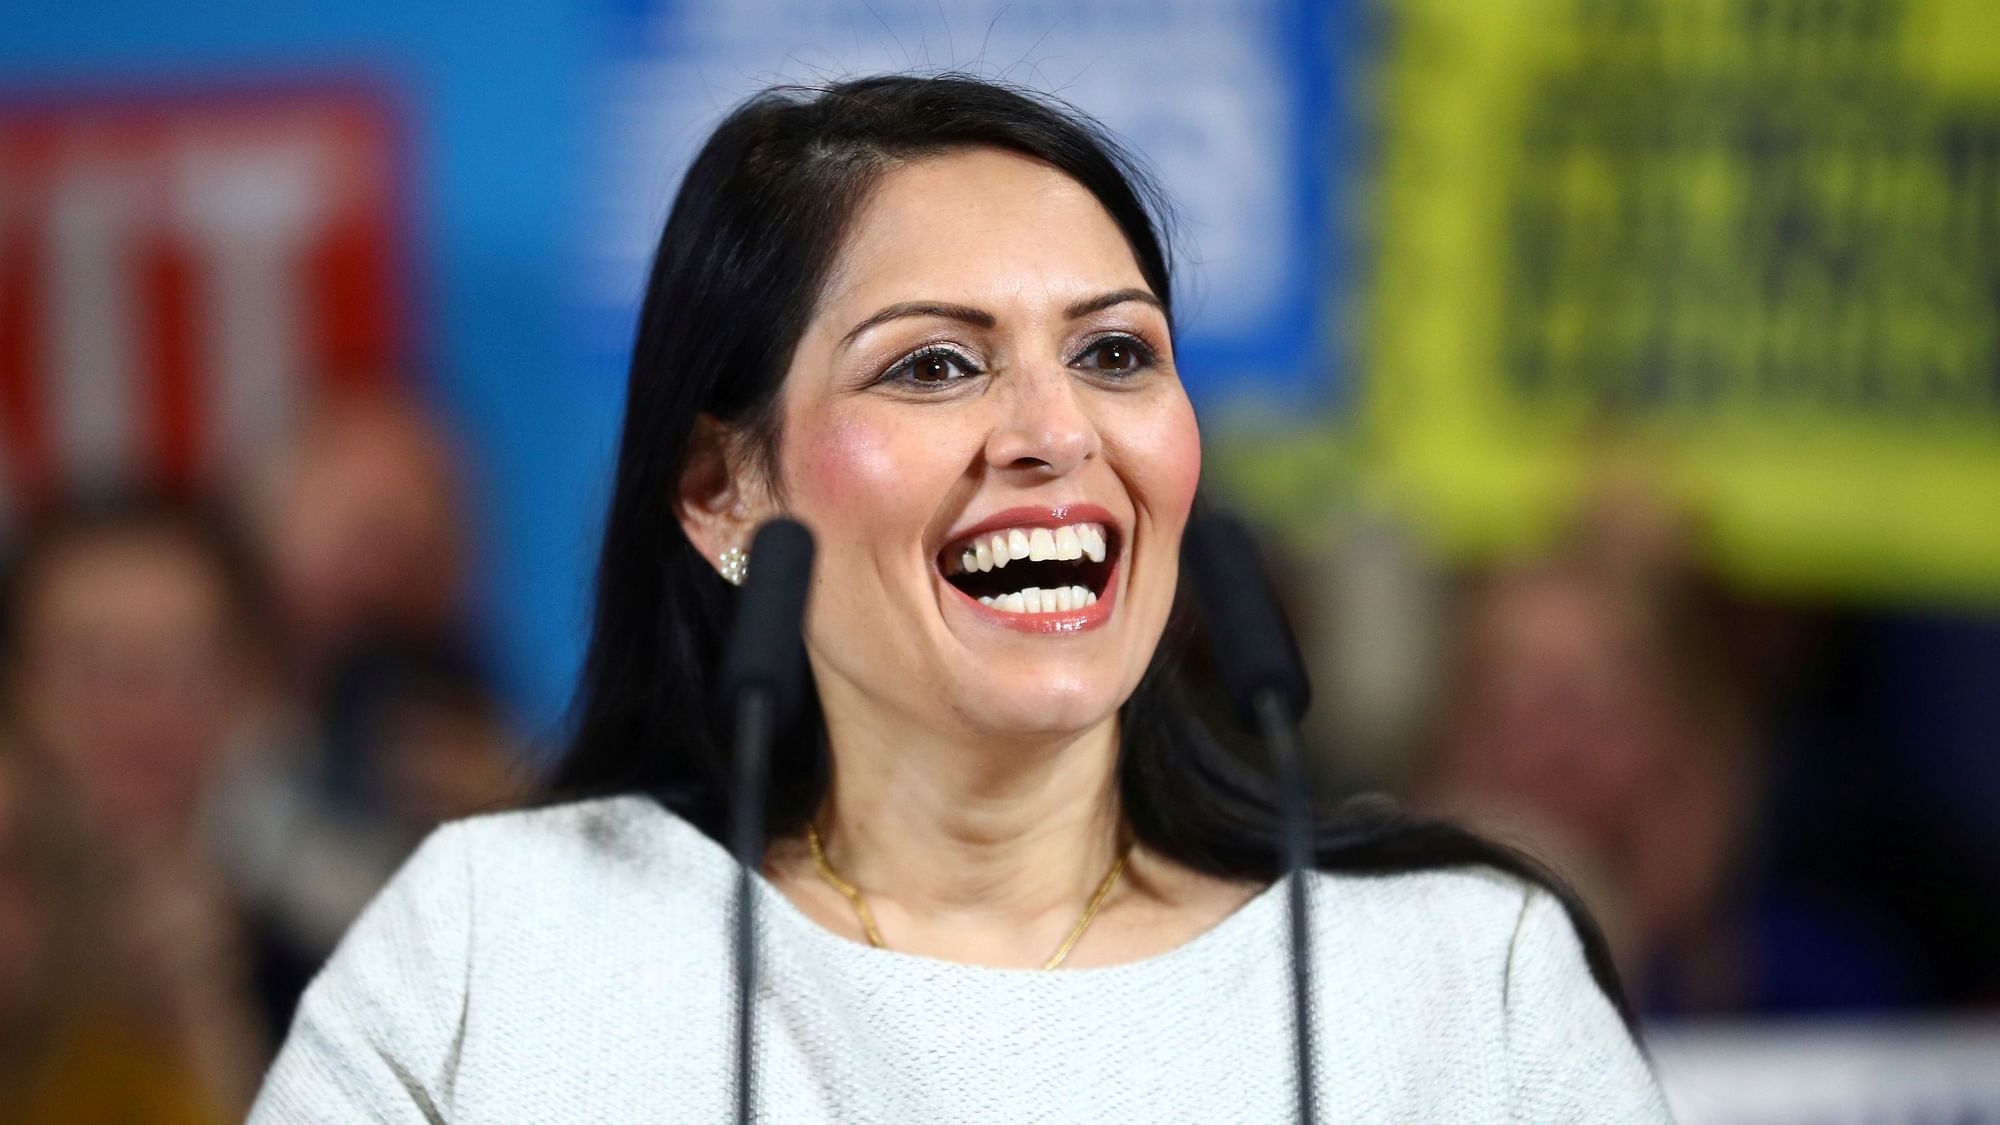 Britain’s Home Secretary Priti Patel during a rally event as part of the General Election campaign, in Colchester, England on Monday, Dec. 2, 2019.